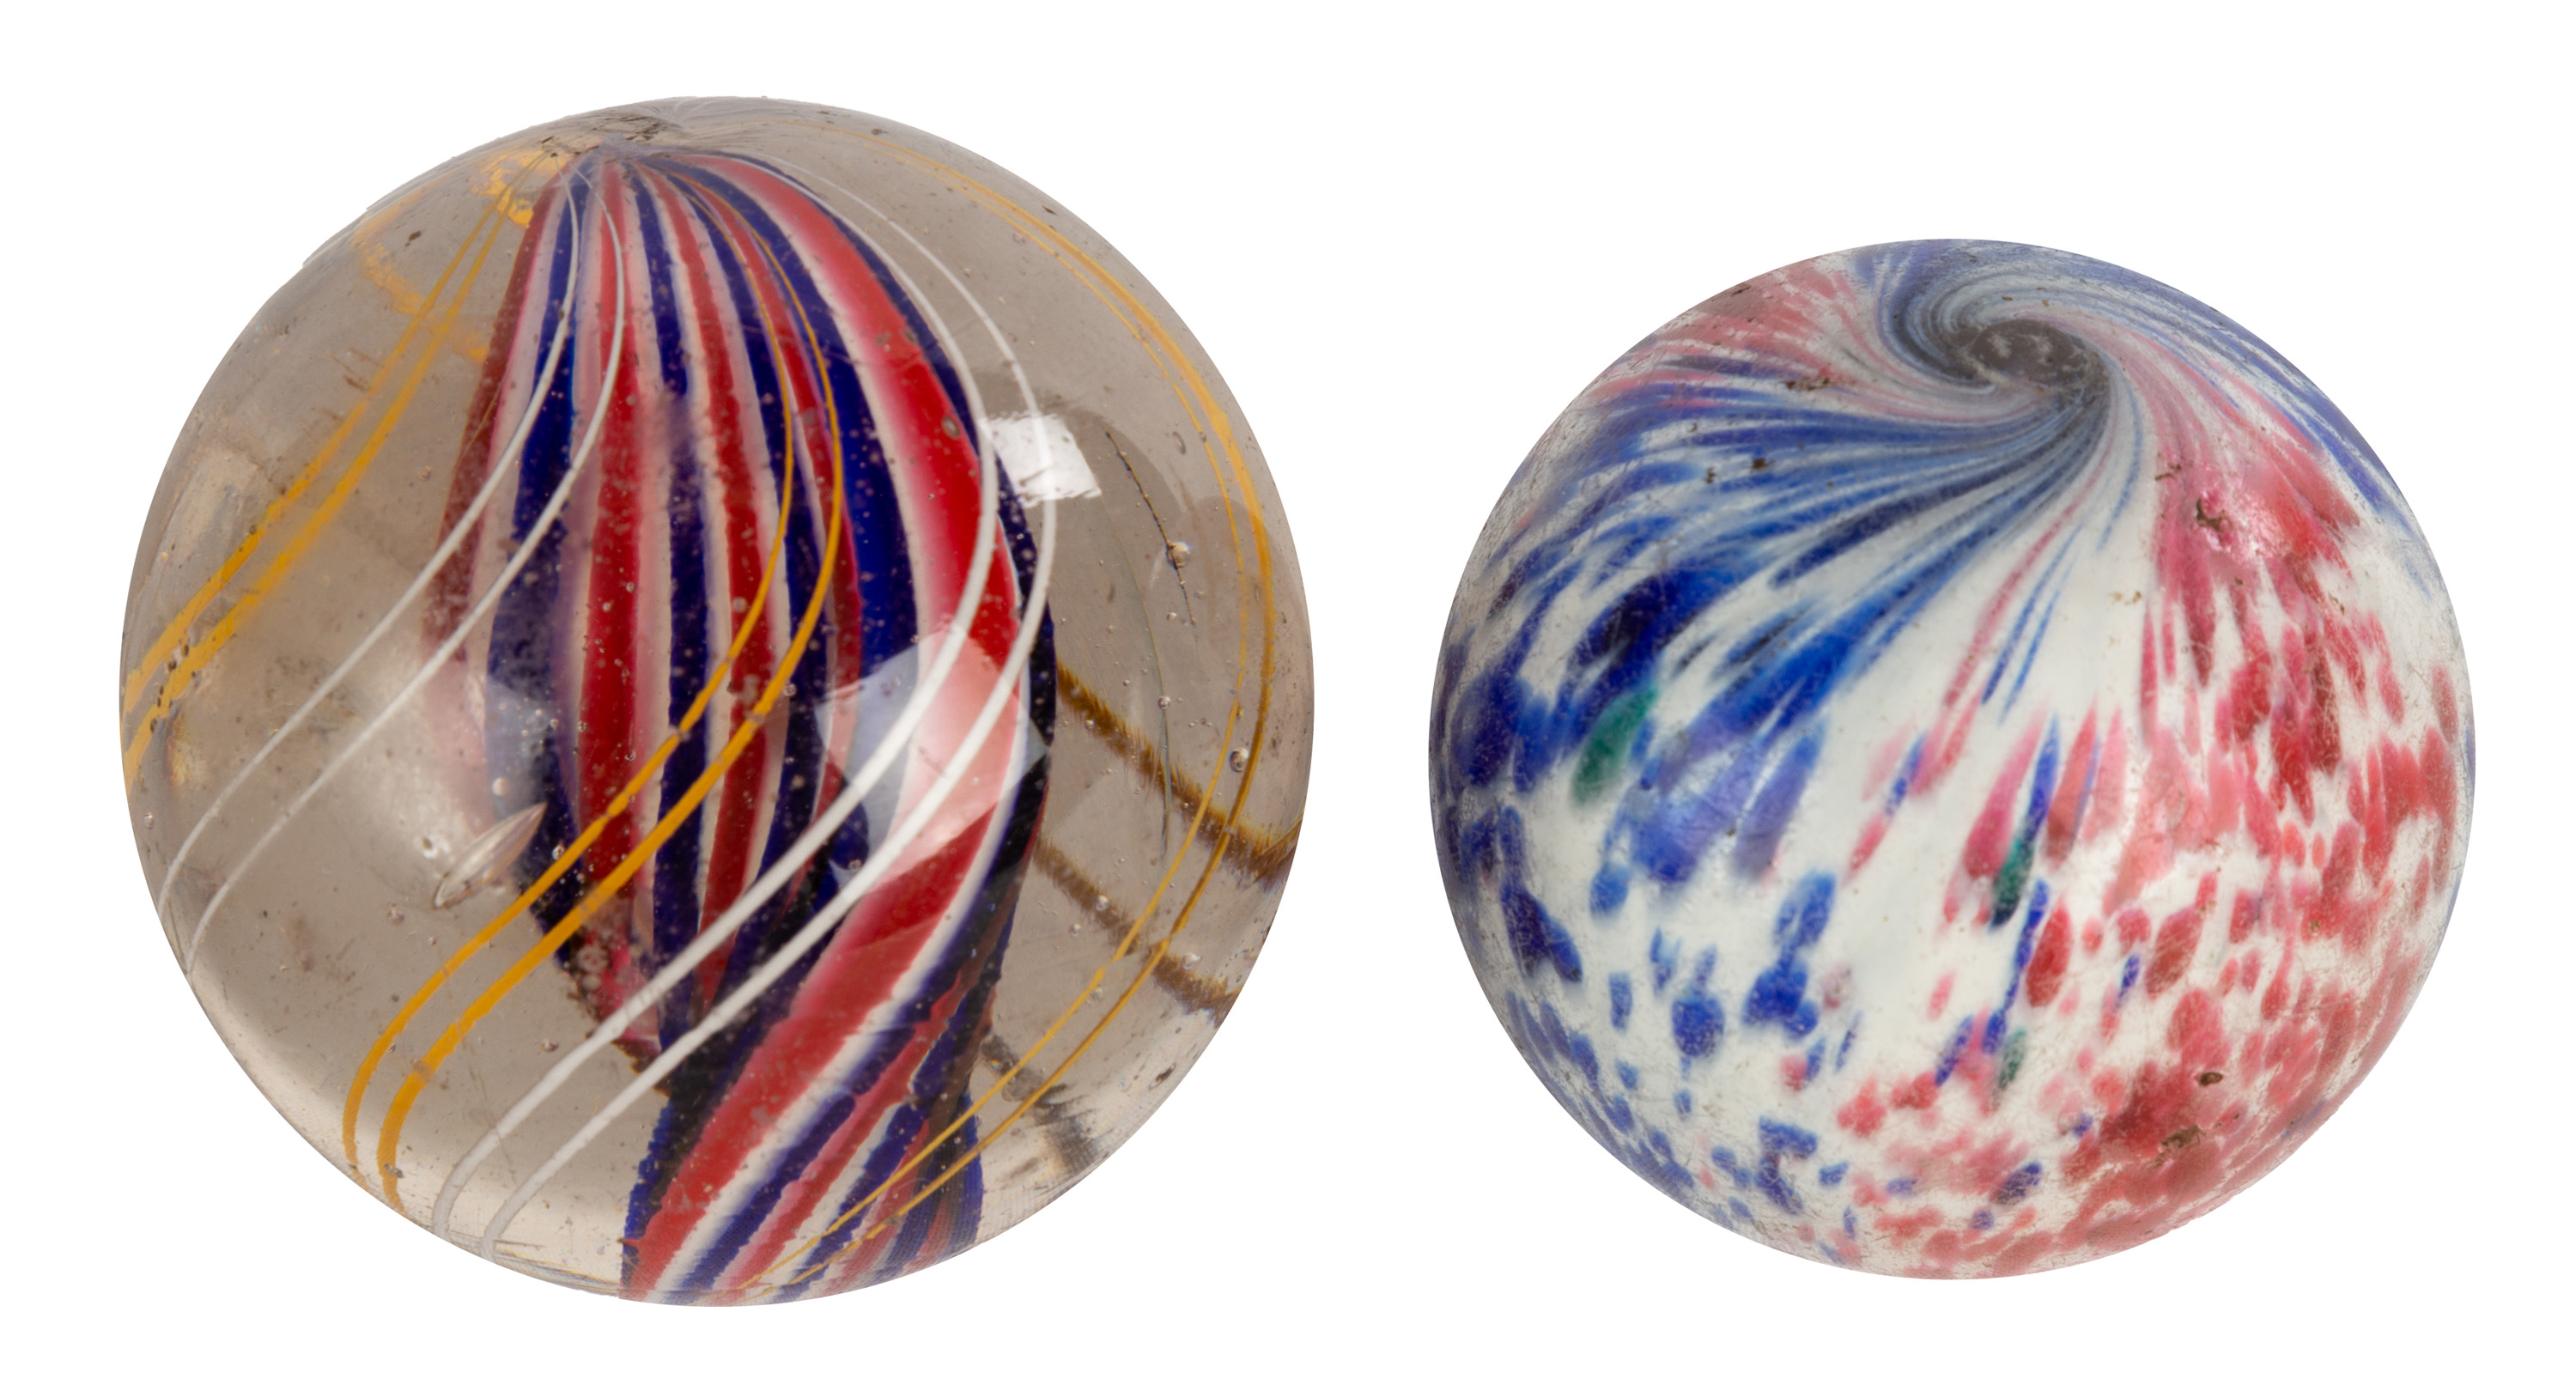 SWIRL AND ONION SKIN GLASS MARBLES 28d7a1